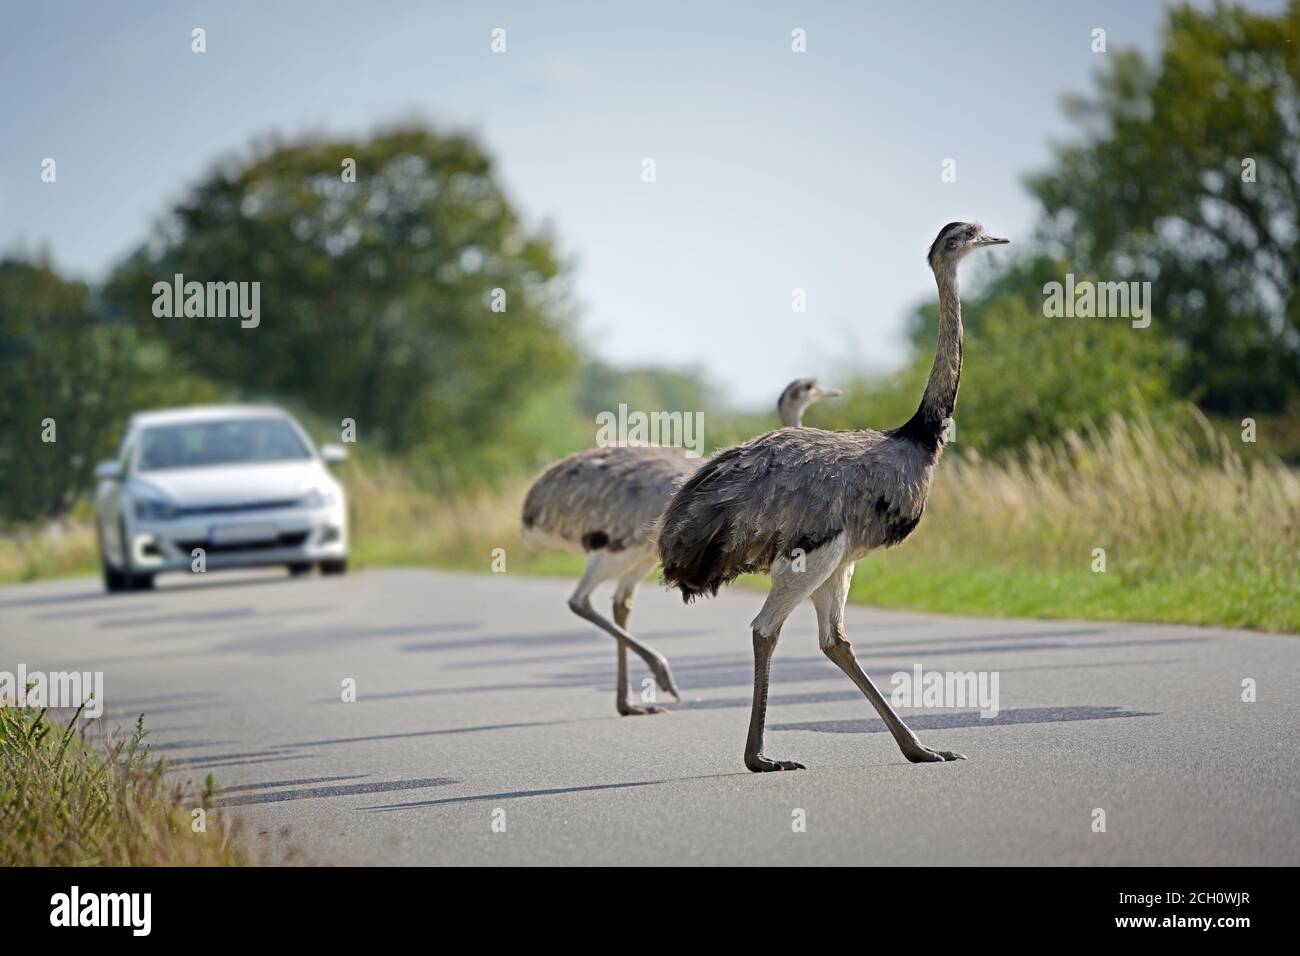 Two nandus or greater rhea (Rhea americana) cross the road in front of an approaching car in Mecklenburg West Pomerania, Germany, the big birds can be Stock Photo